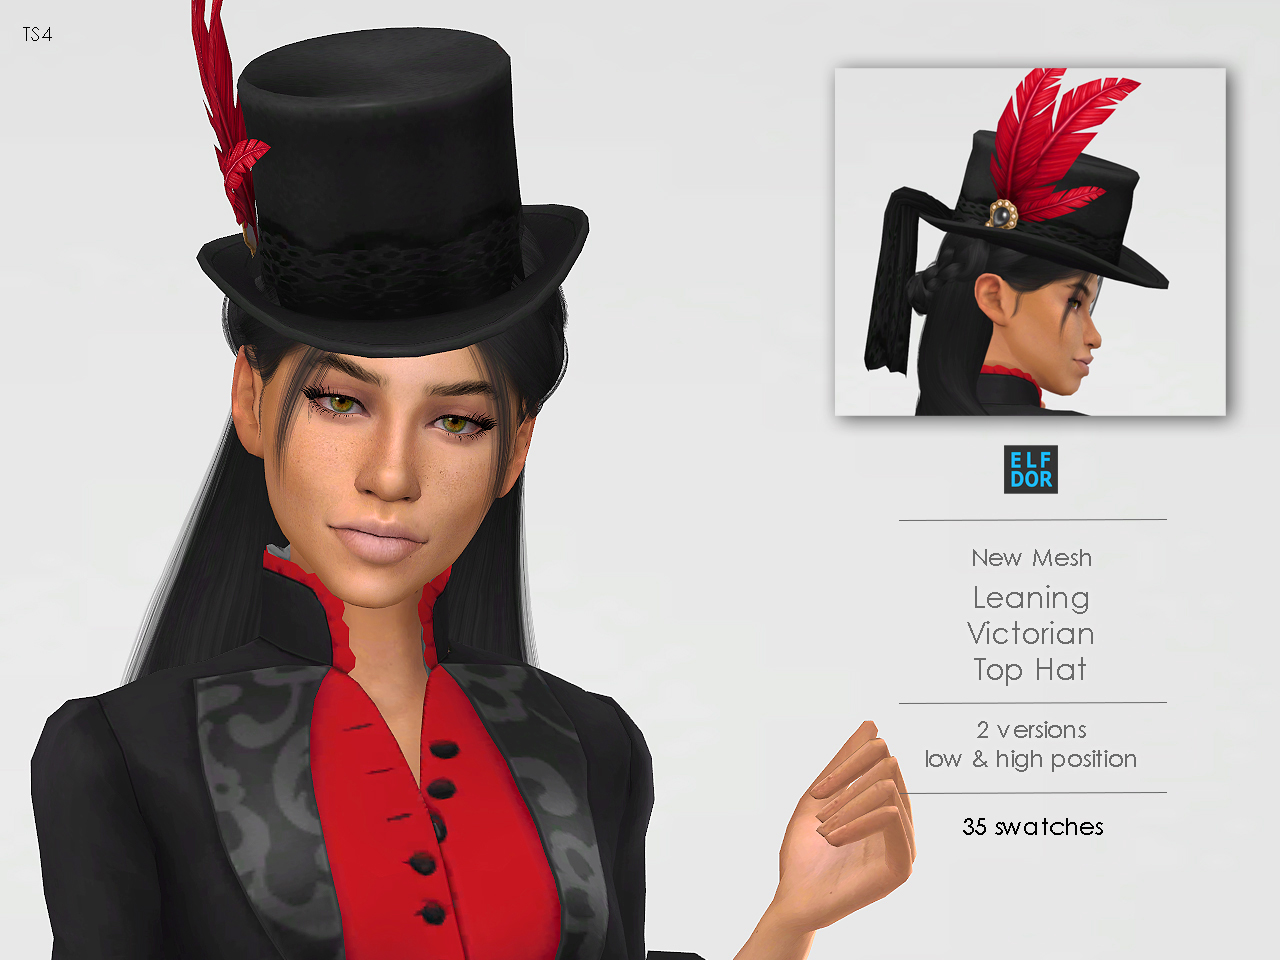 Roblox interminable Rooms Top hat. Roblox interminable Rooms entity Top hat.